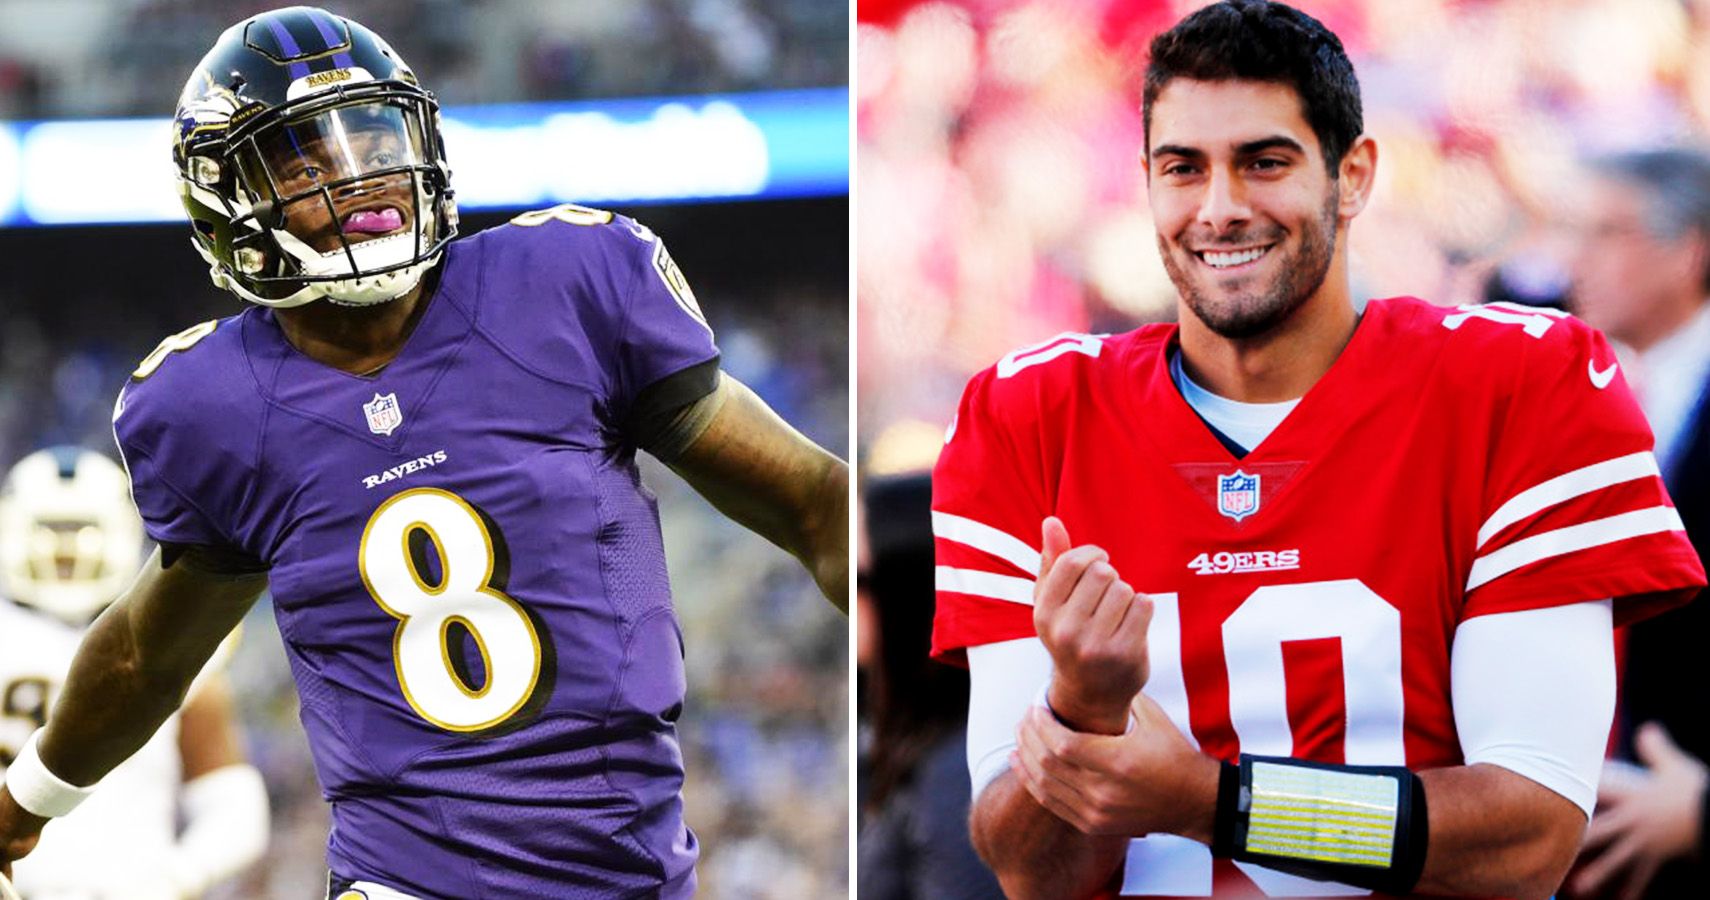 The 24 Highest Selling NFL Jerseys This Offseason